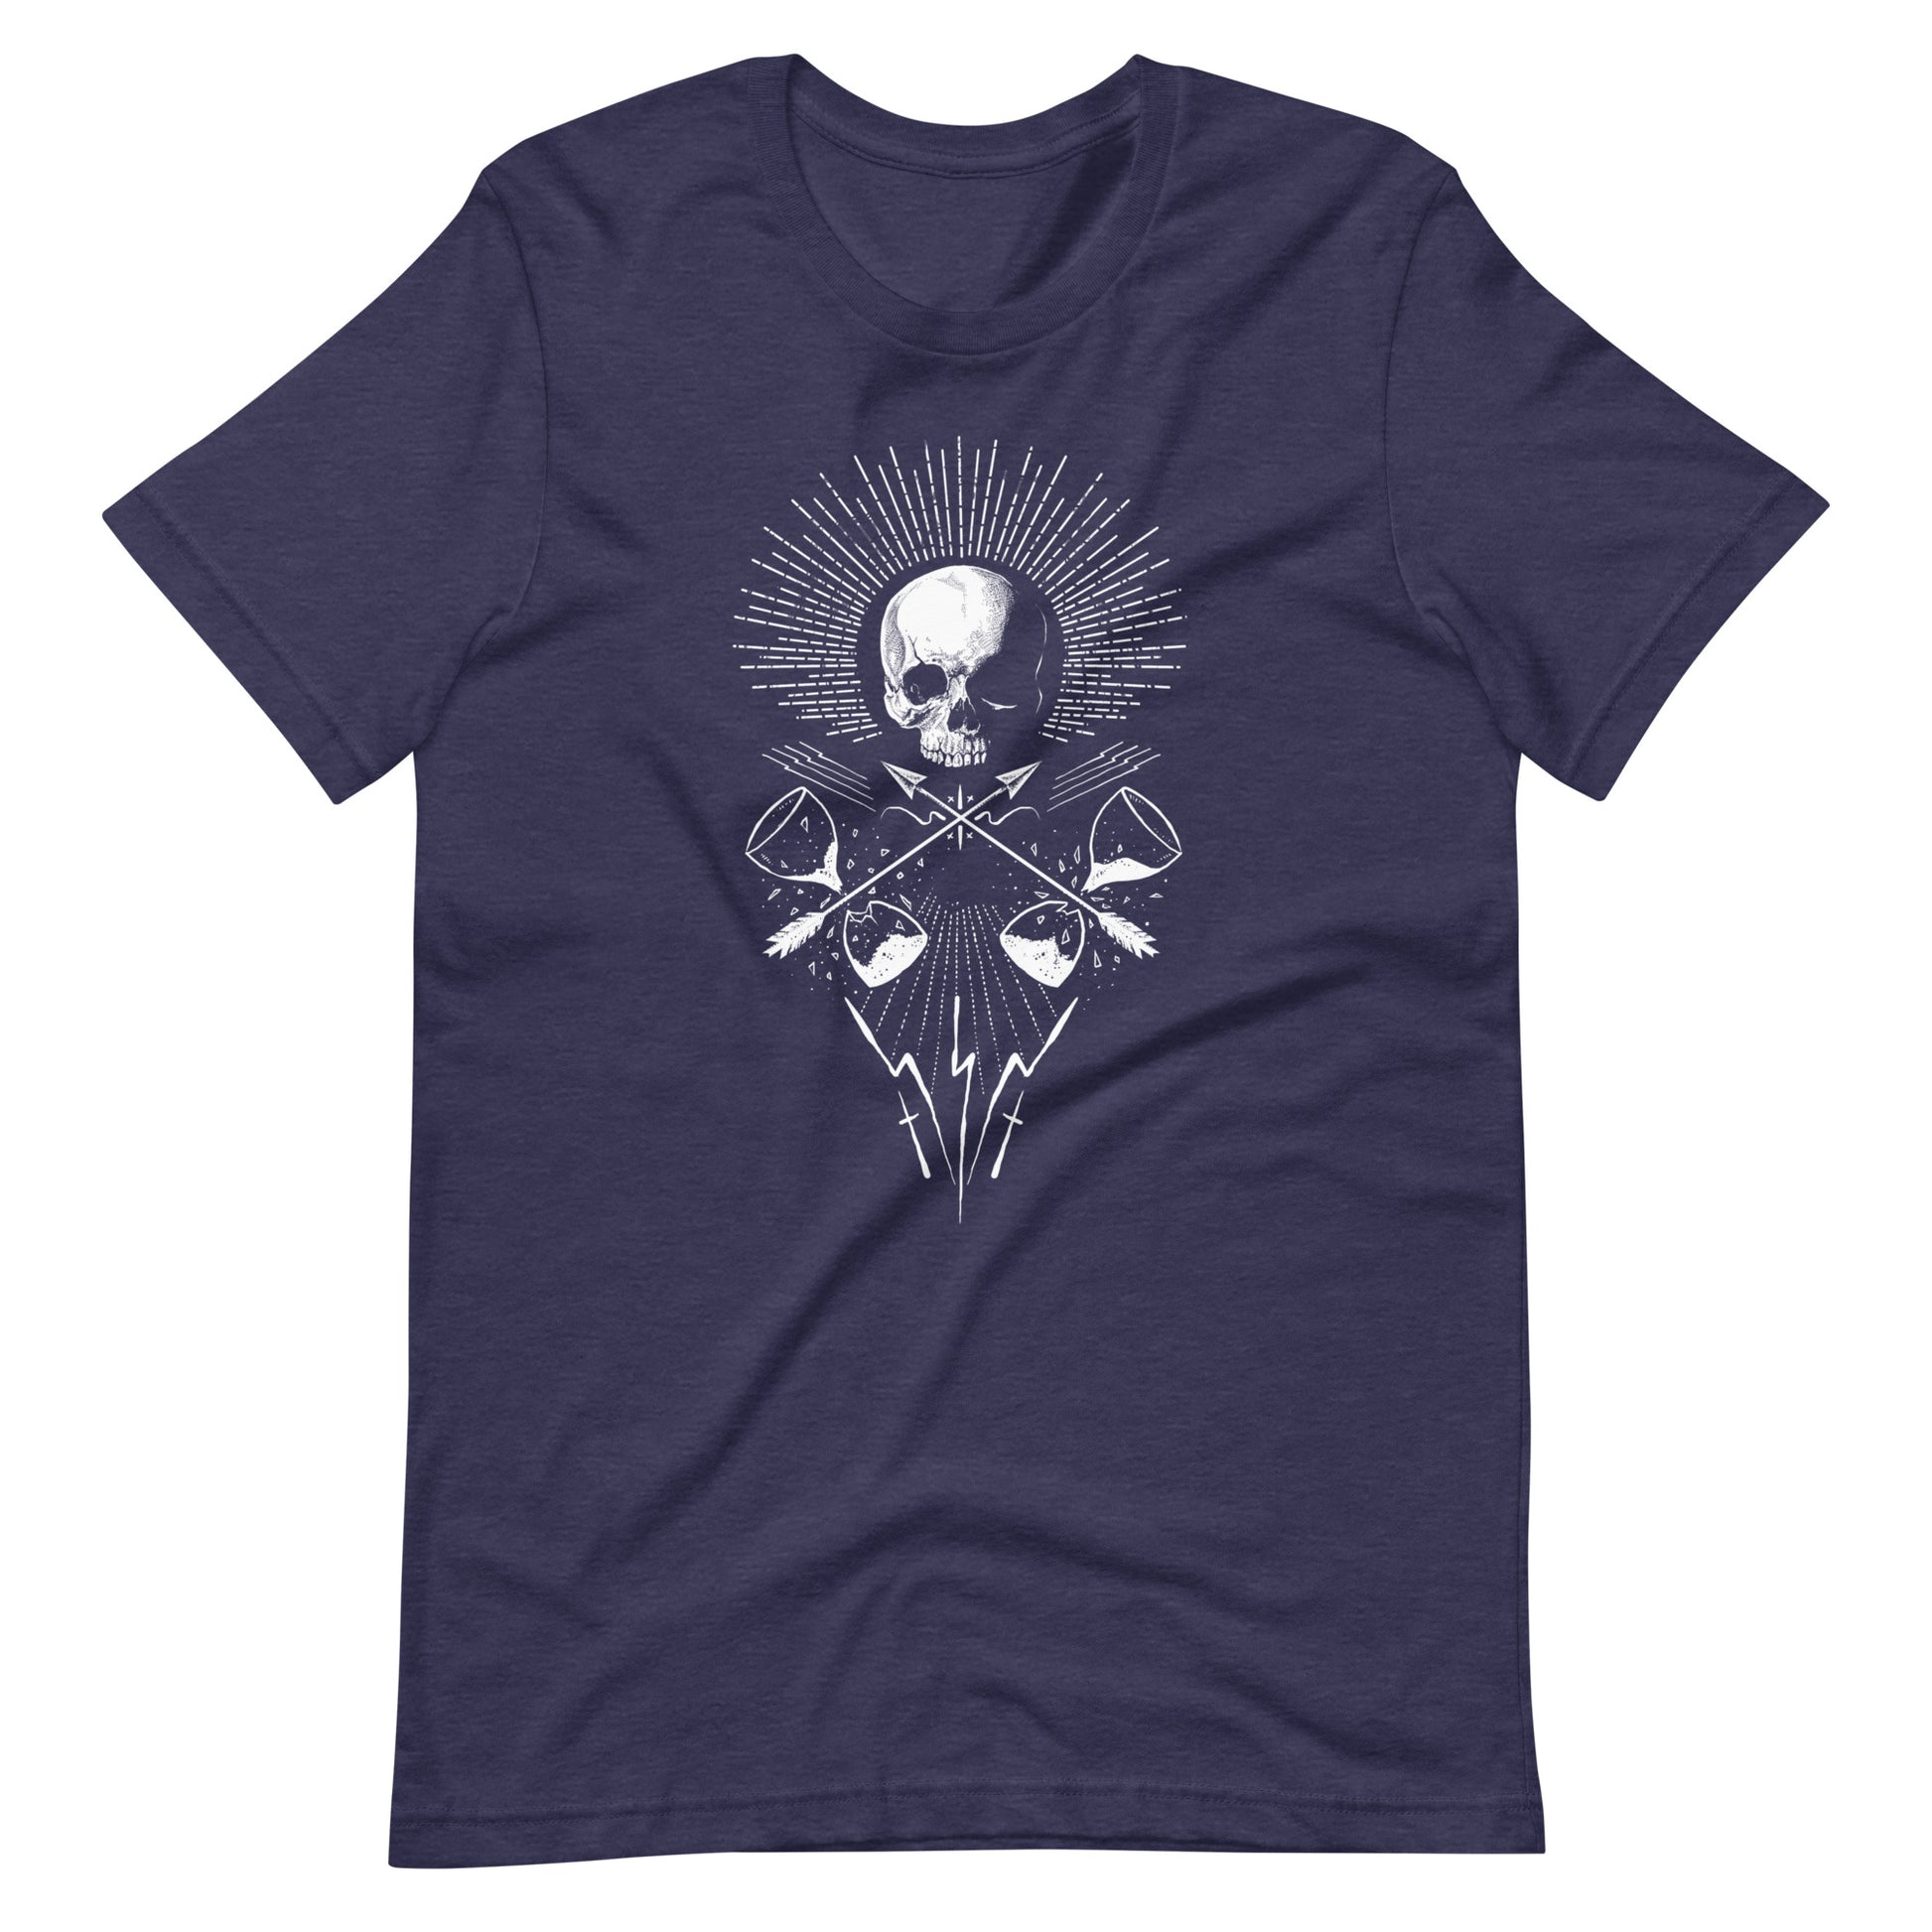 For the Sake of Future - Men's t-shirt - Heather Midnight Navy Front